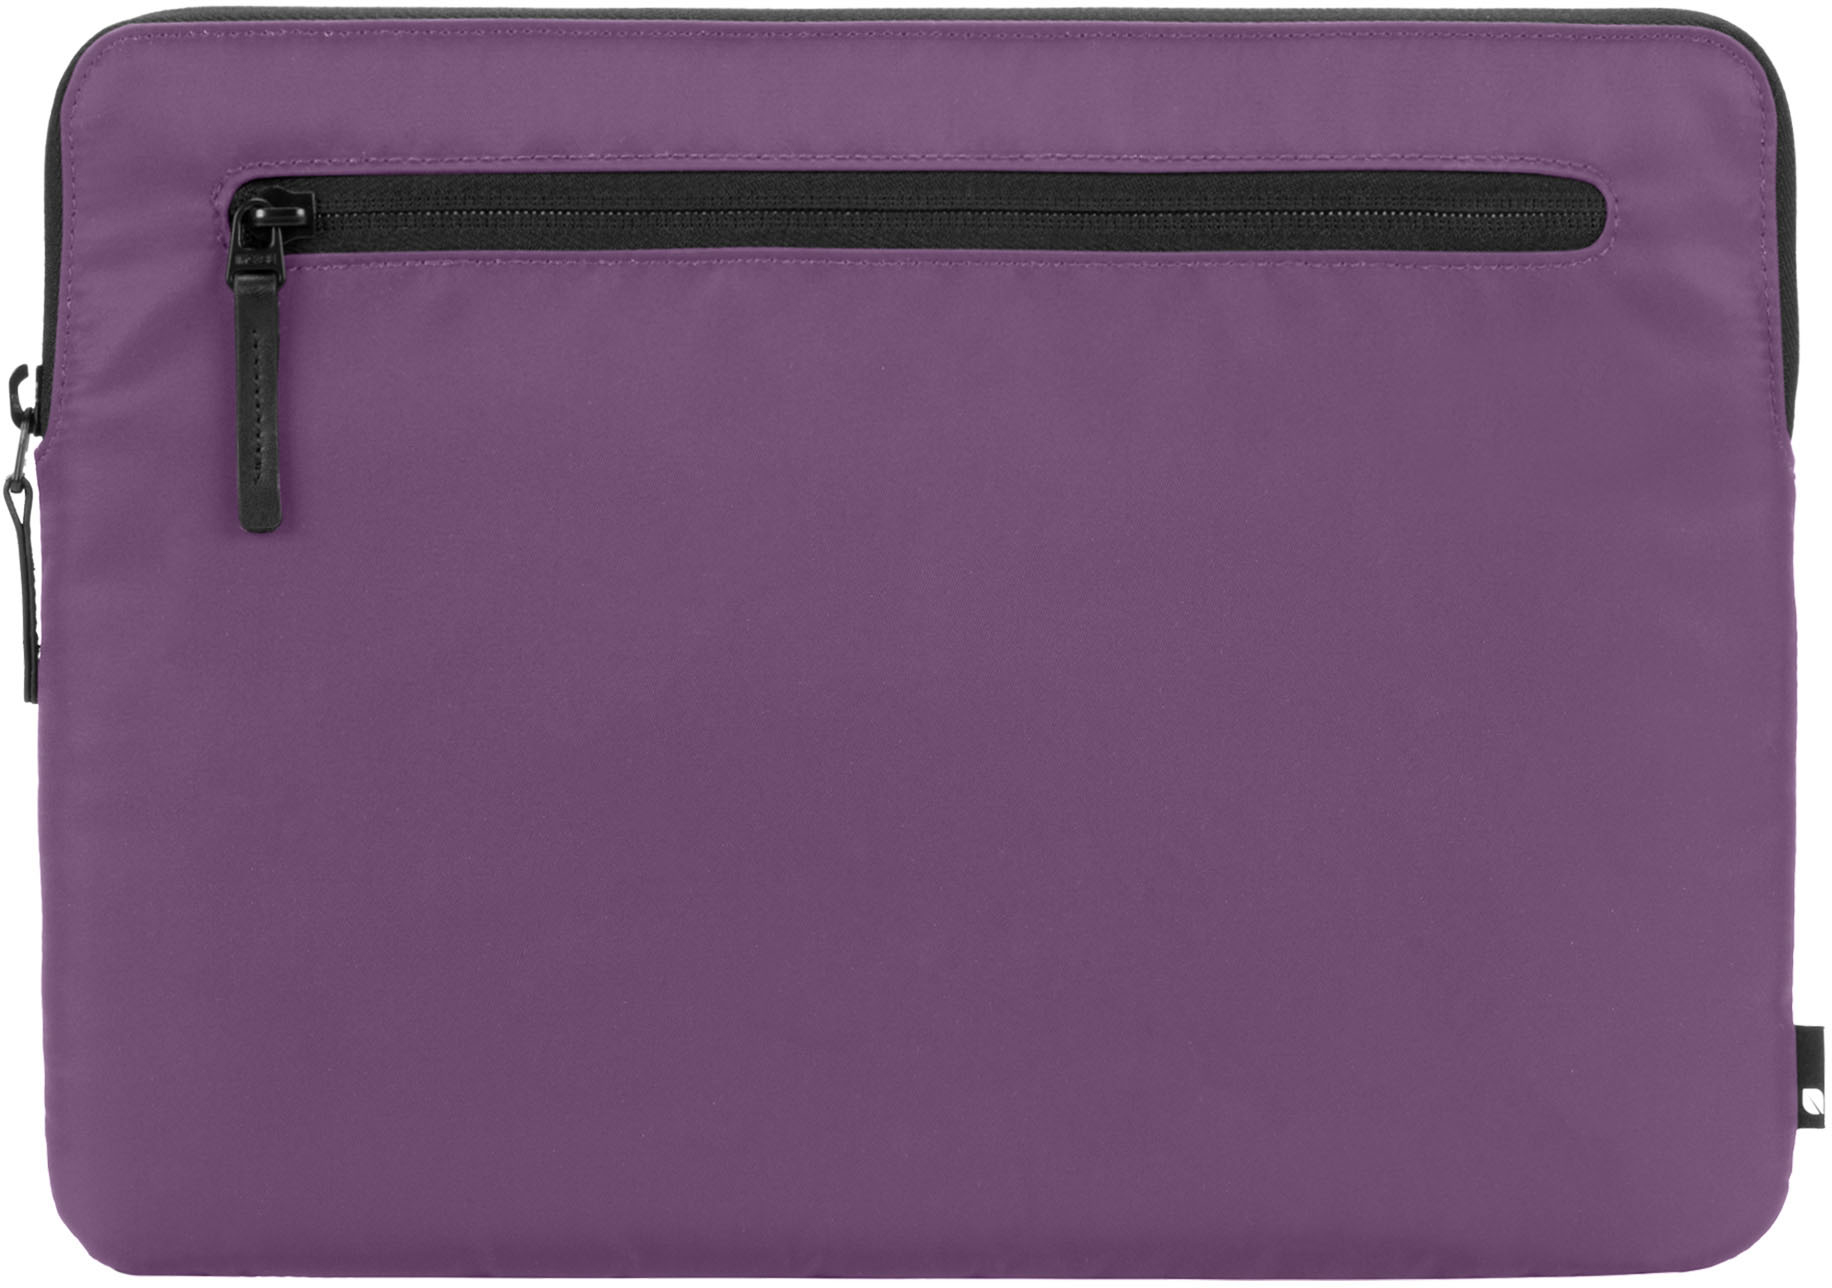 Profile Series Purple Leather Luxury Laptop Case Compatible with The MSI Creator P65 Laptop Broonel